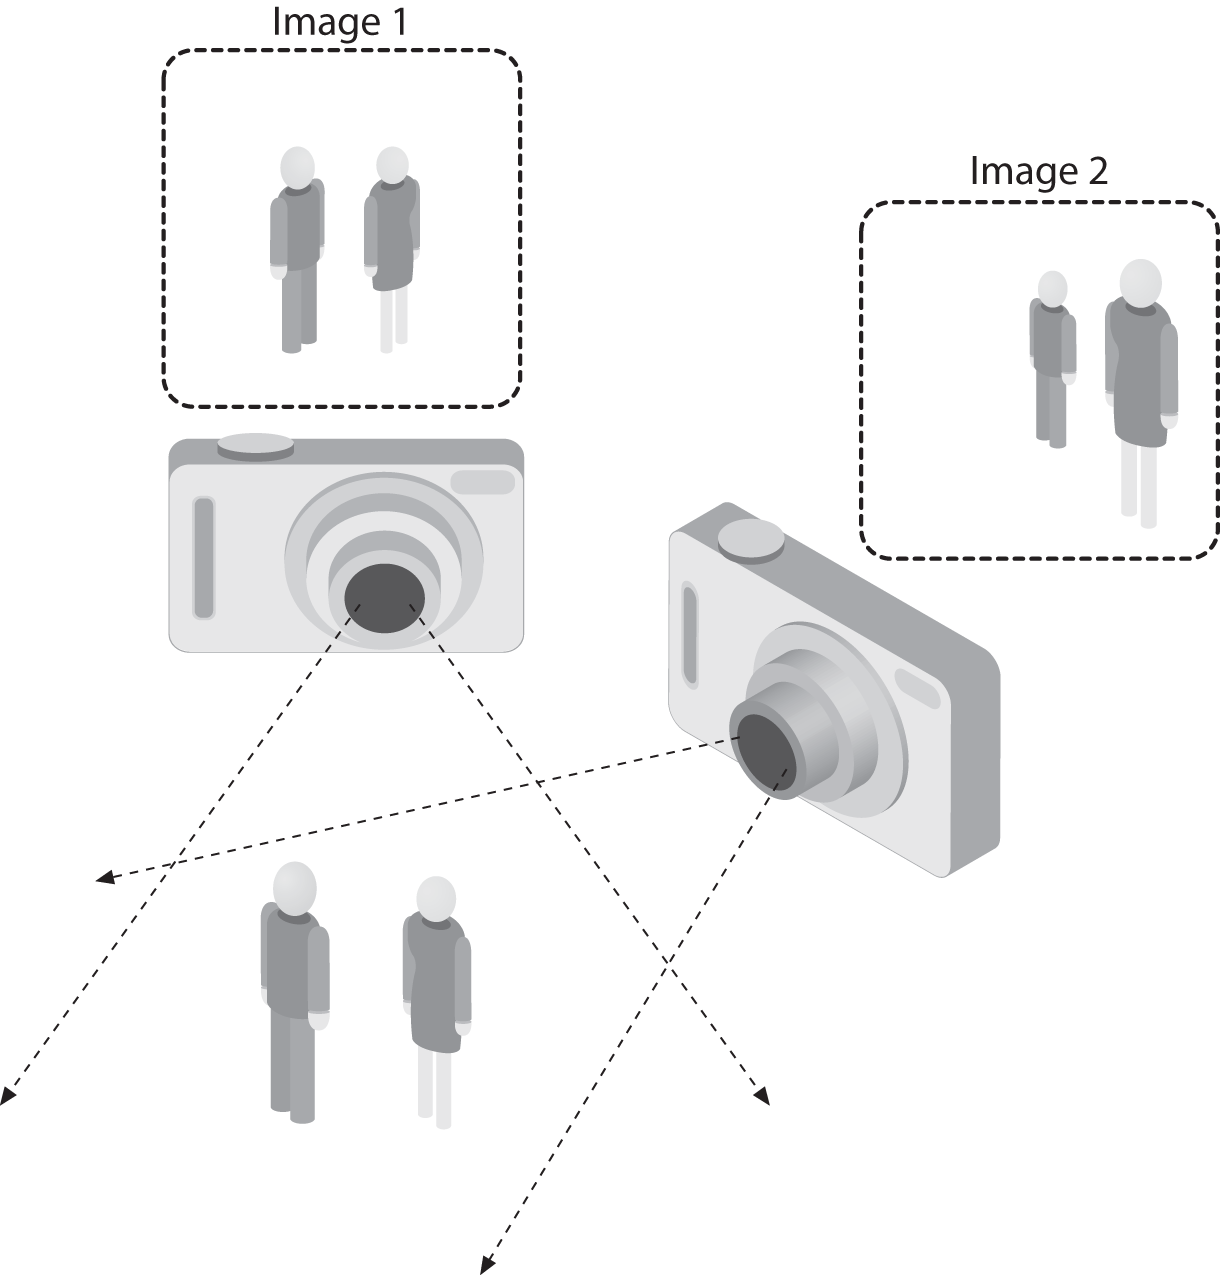 The ill-posed nature of vision: the 2D appearance of objects can change radically with viewpoint